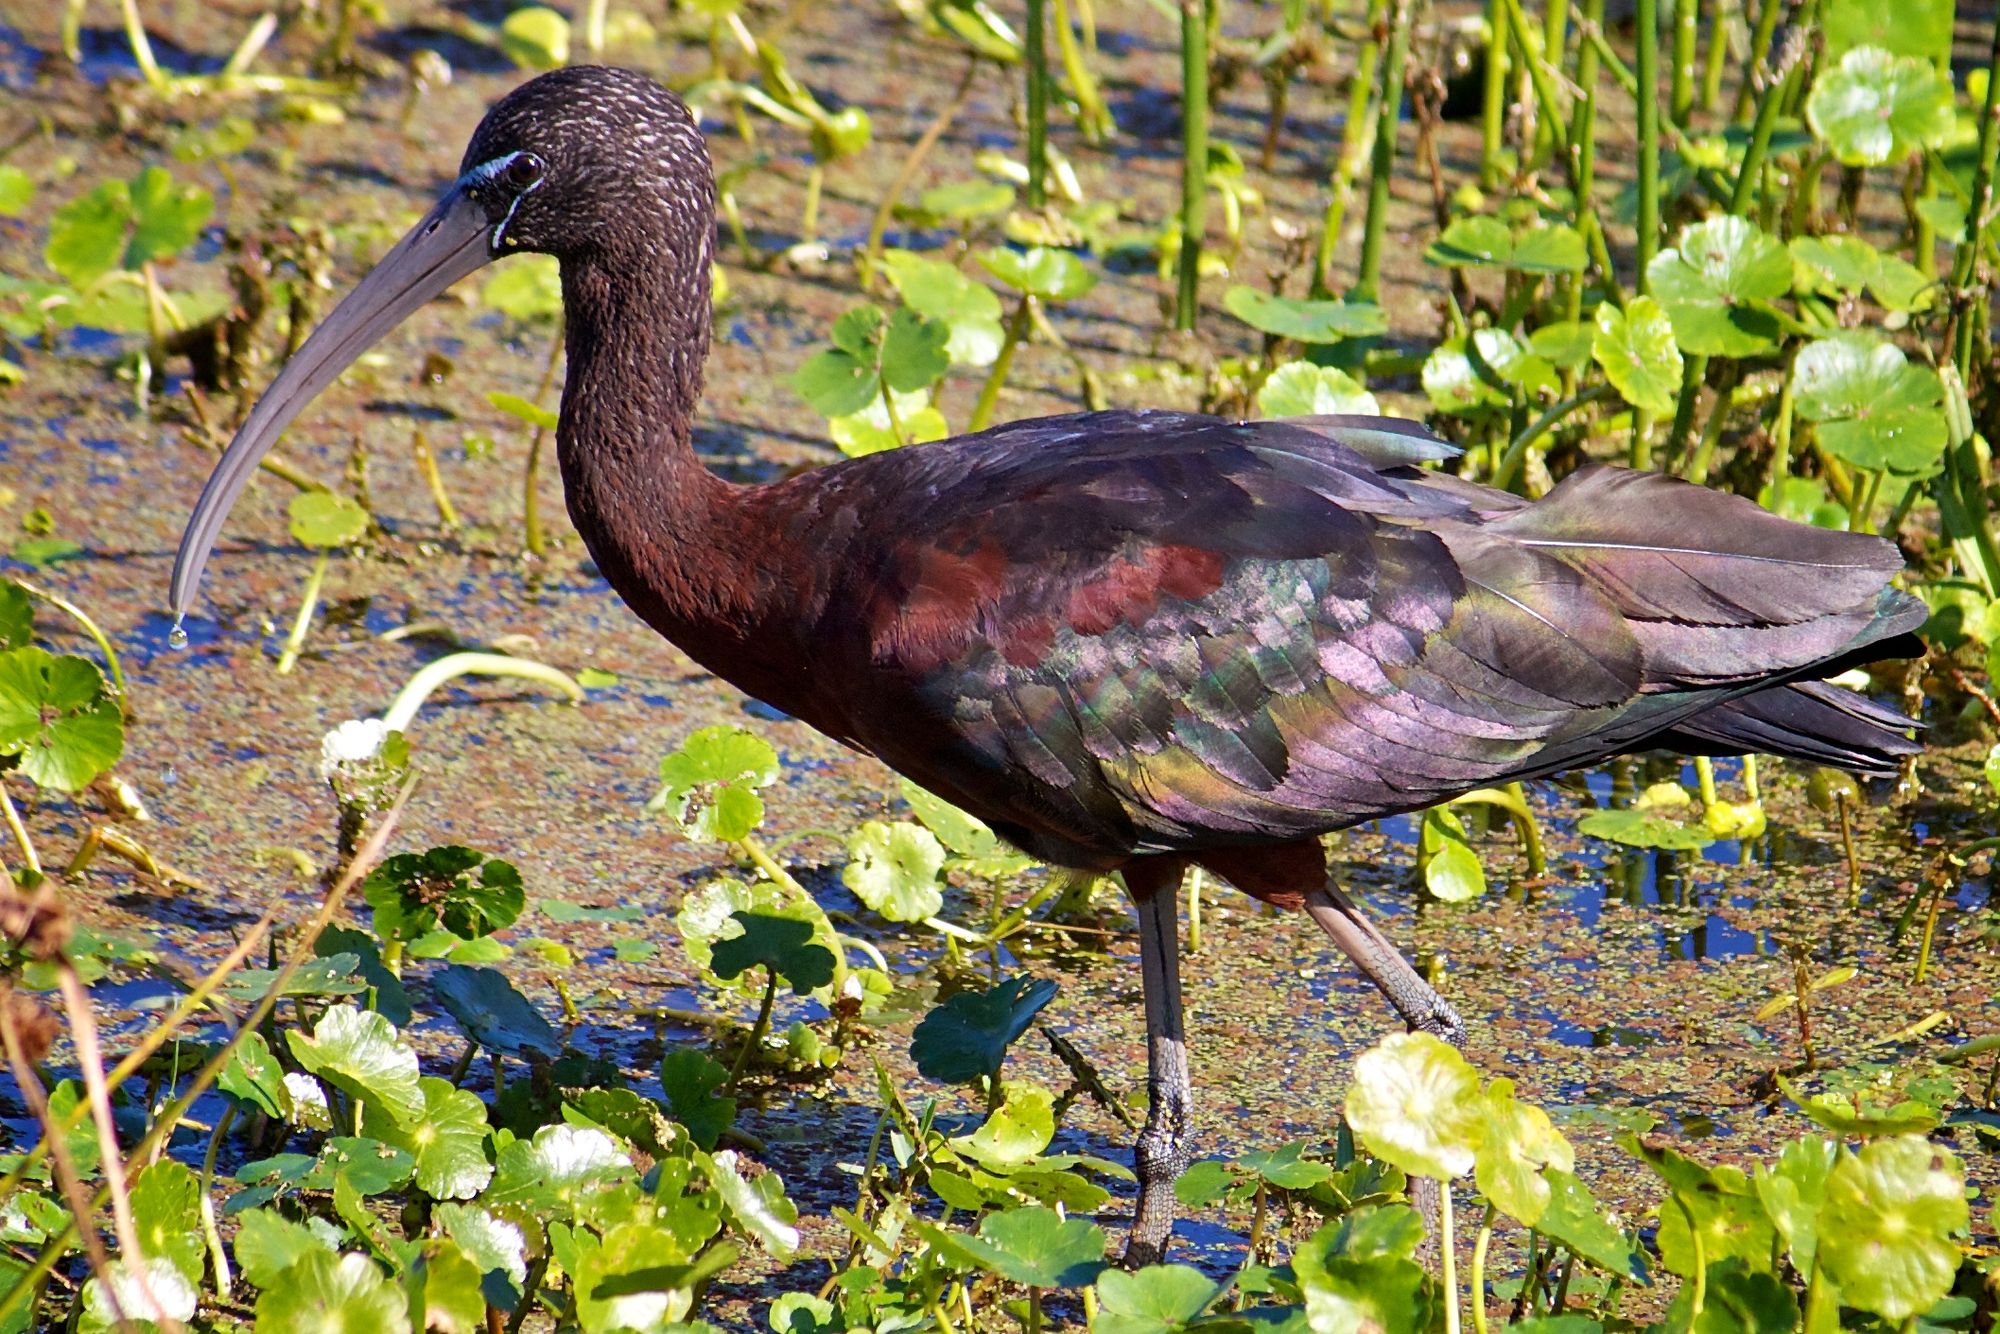 Glossy ibis by US Fish and Wildlife Service, Flickr